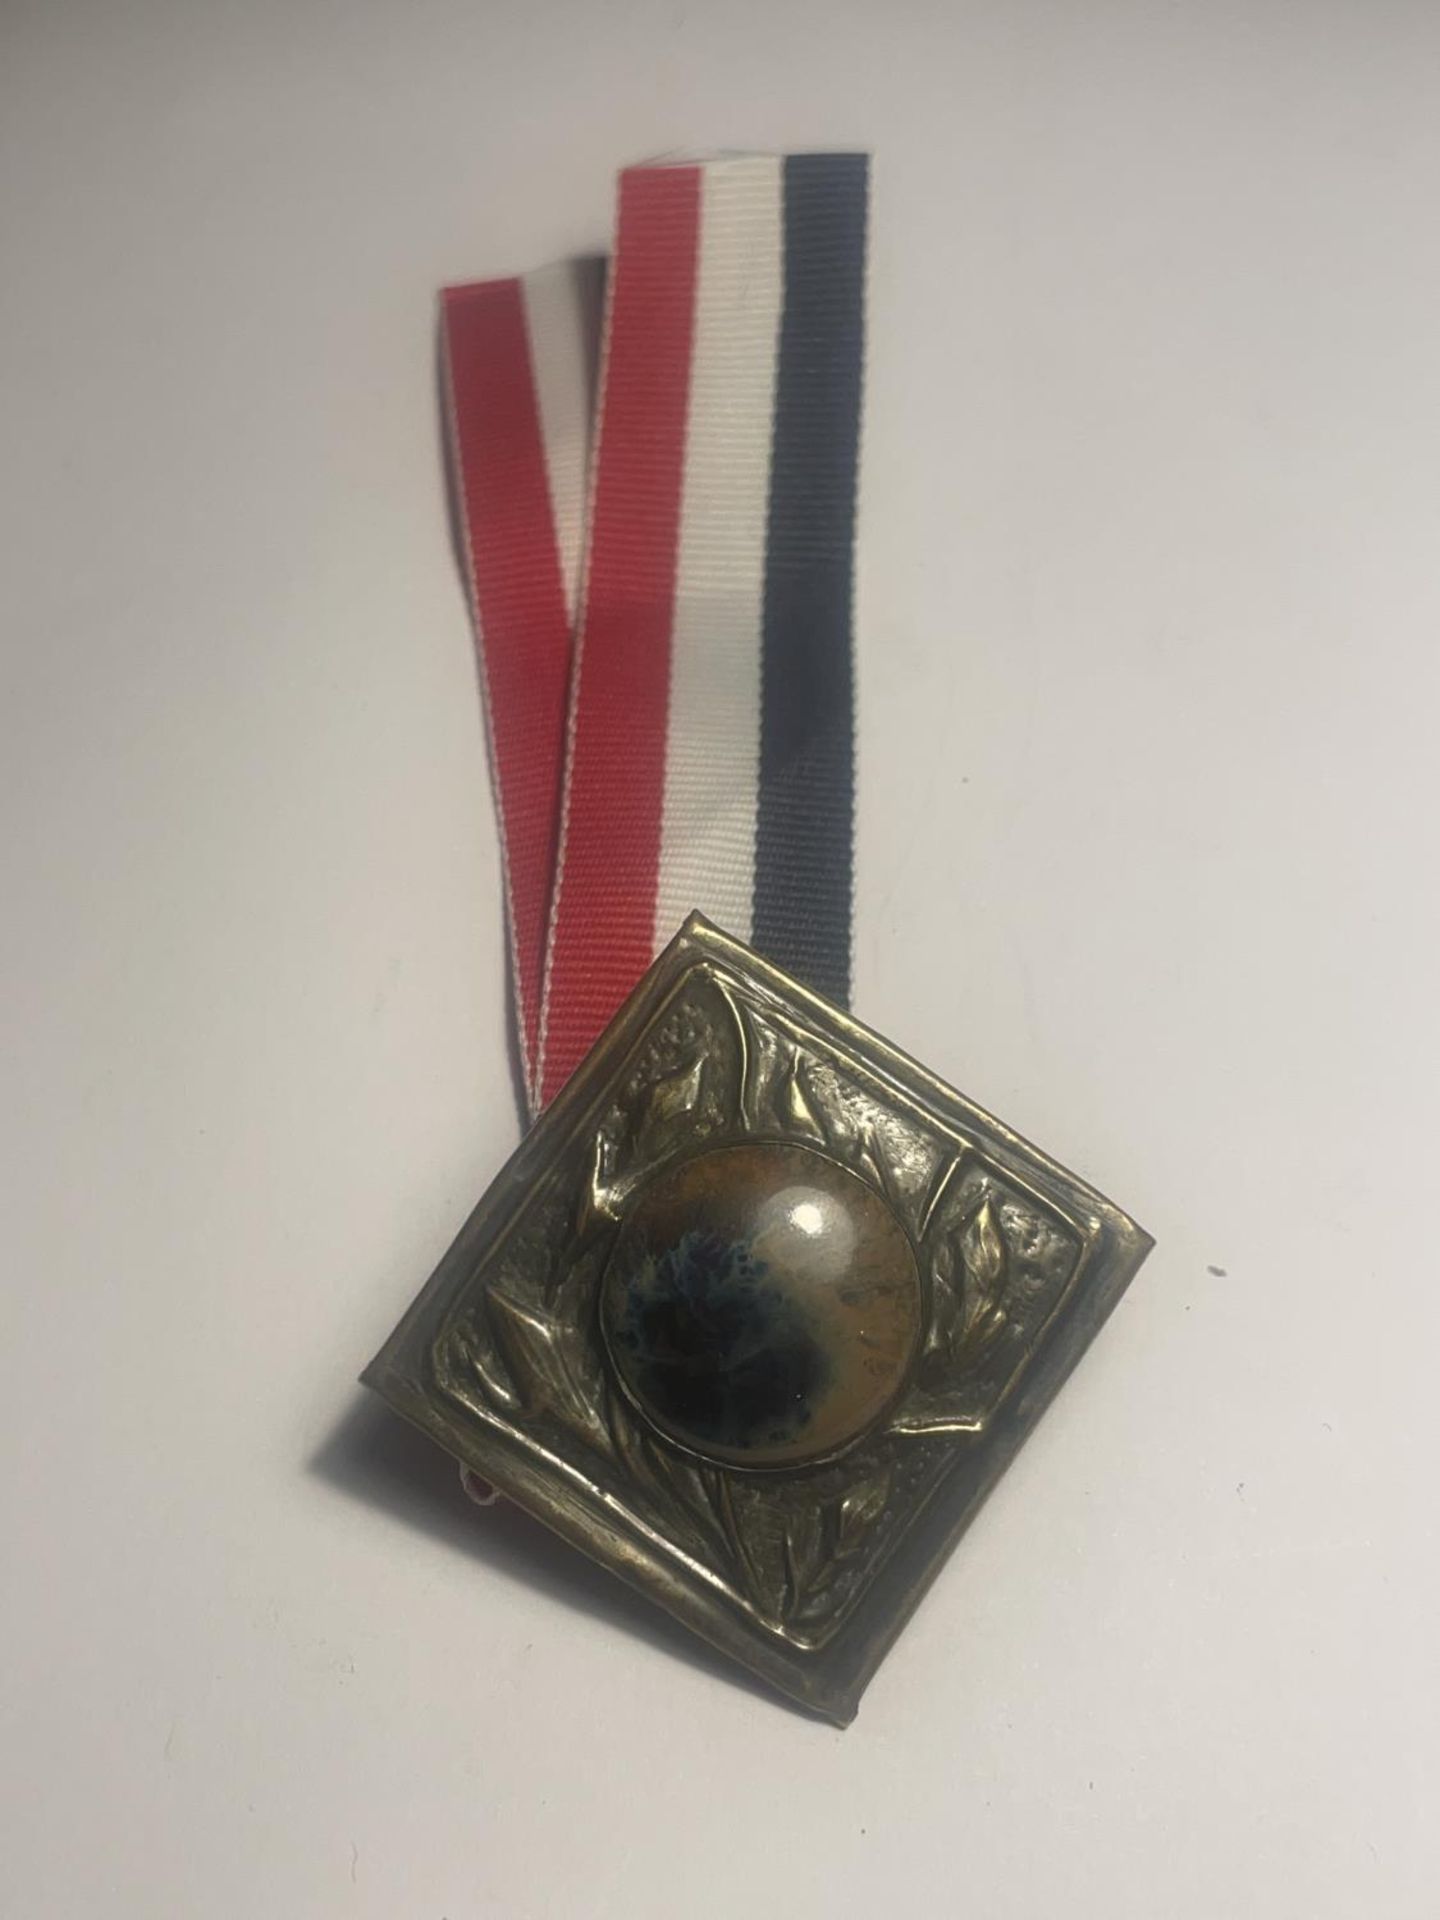 A RUSKIN ARTS AND CRAFTS MEDALLION